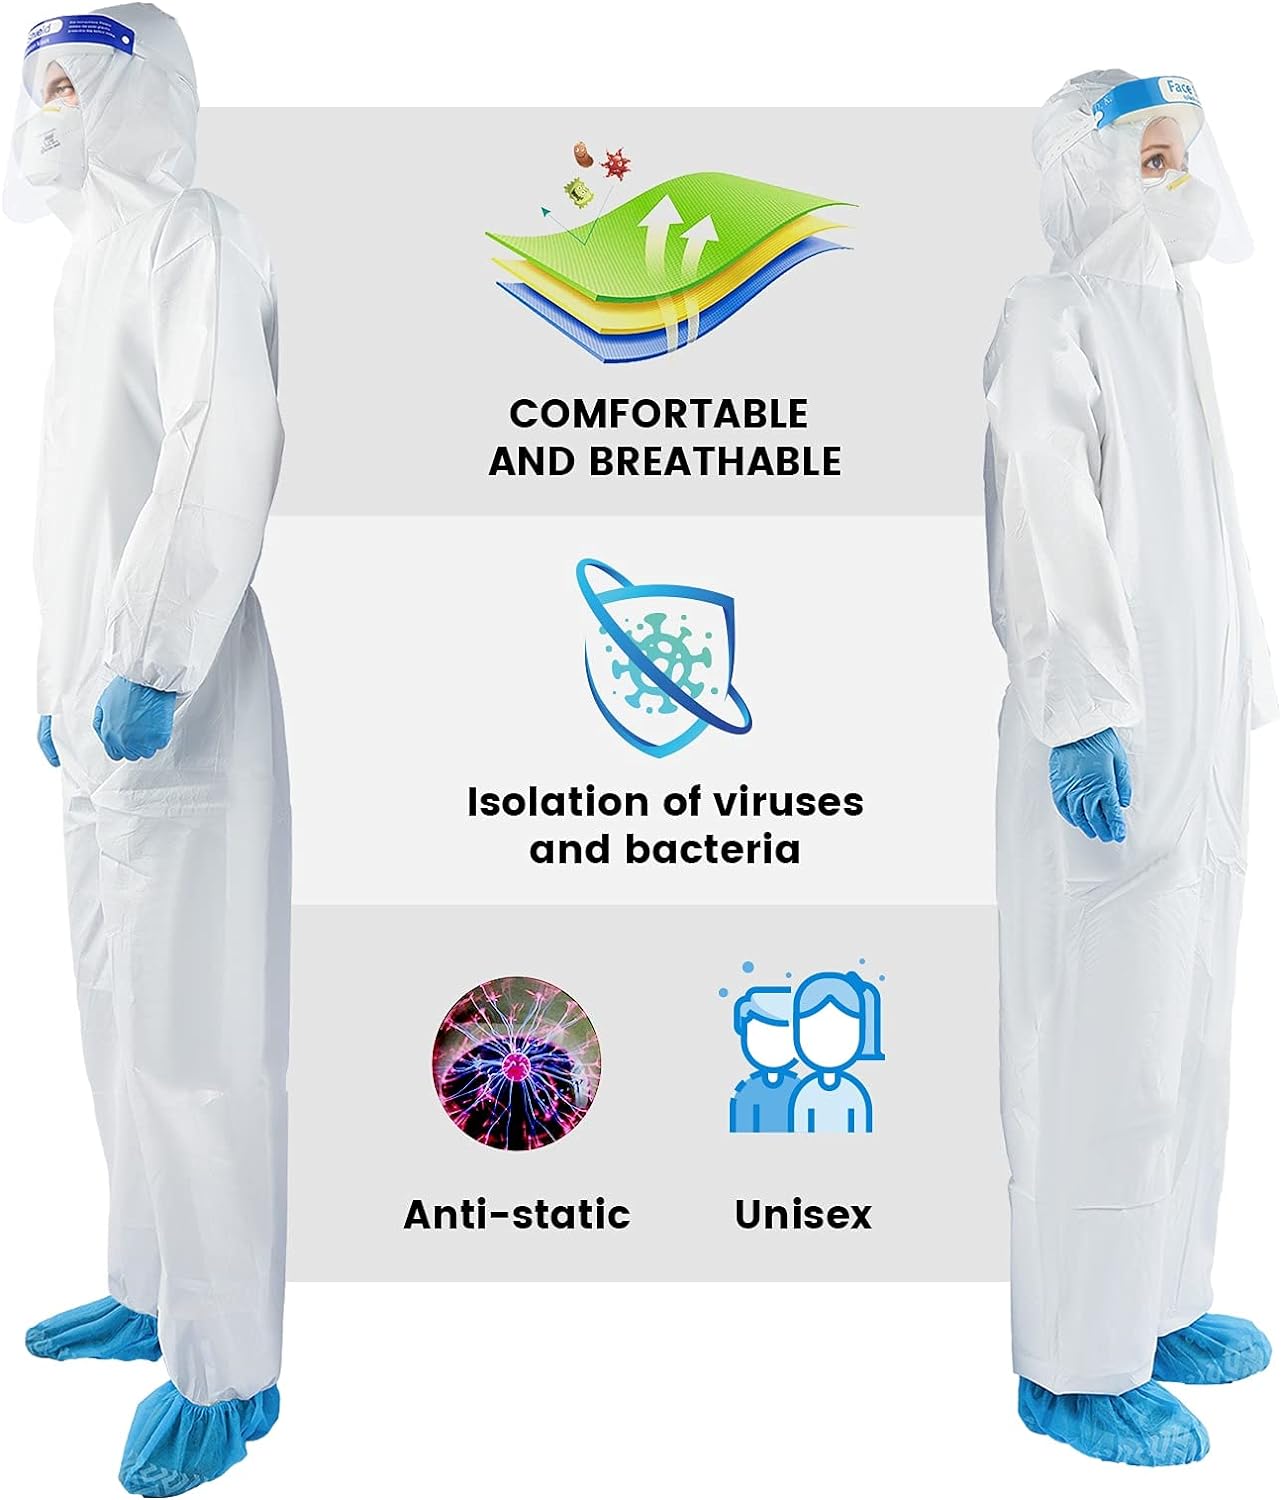 Generic YIBER Disposable Protective Coverall Hazmat Suit, Heavy Duty Painters Coveralls, Made of SF Material, Excellent air permeabilit